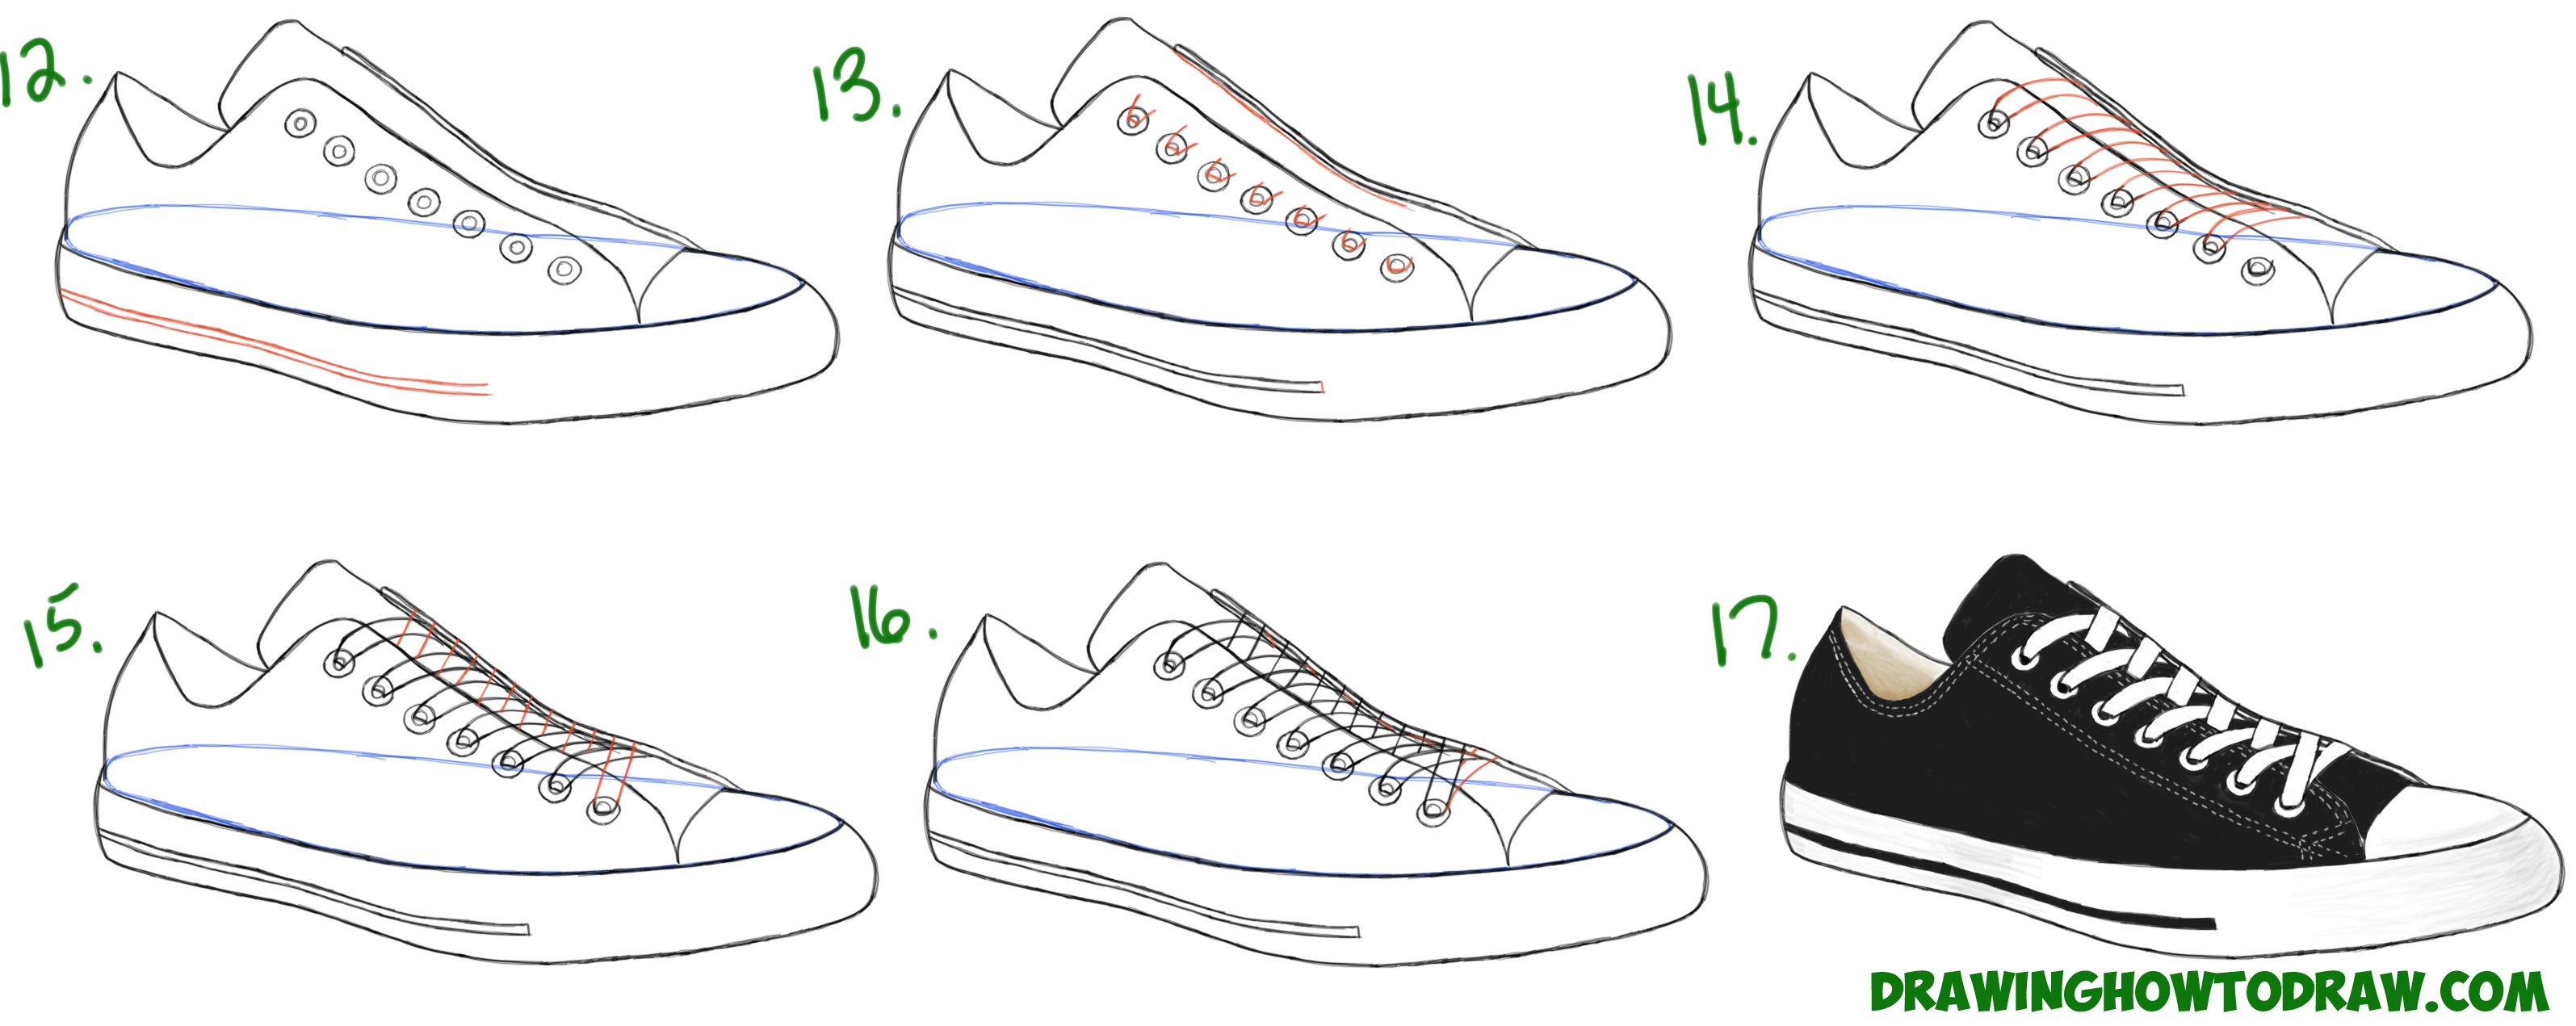 How to Draw Sneakers / Shoes with Easy Step by Step Drawing Tutorial ...